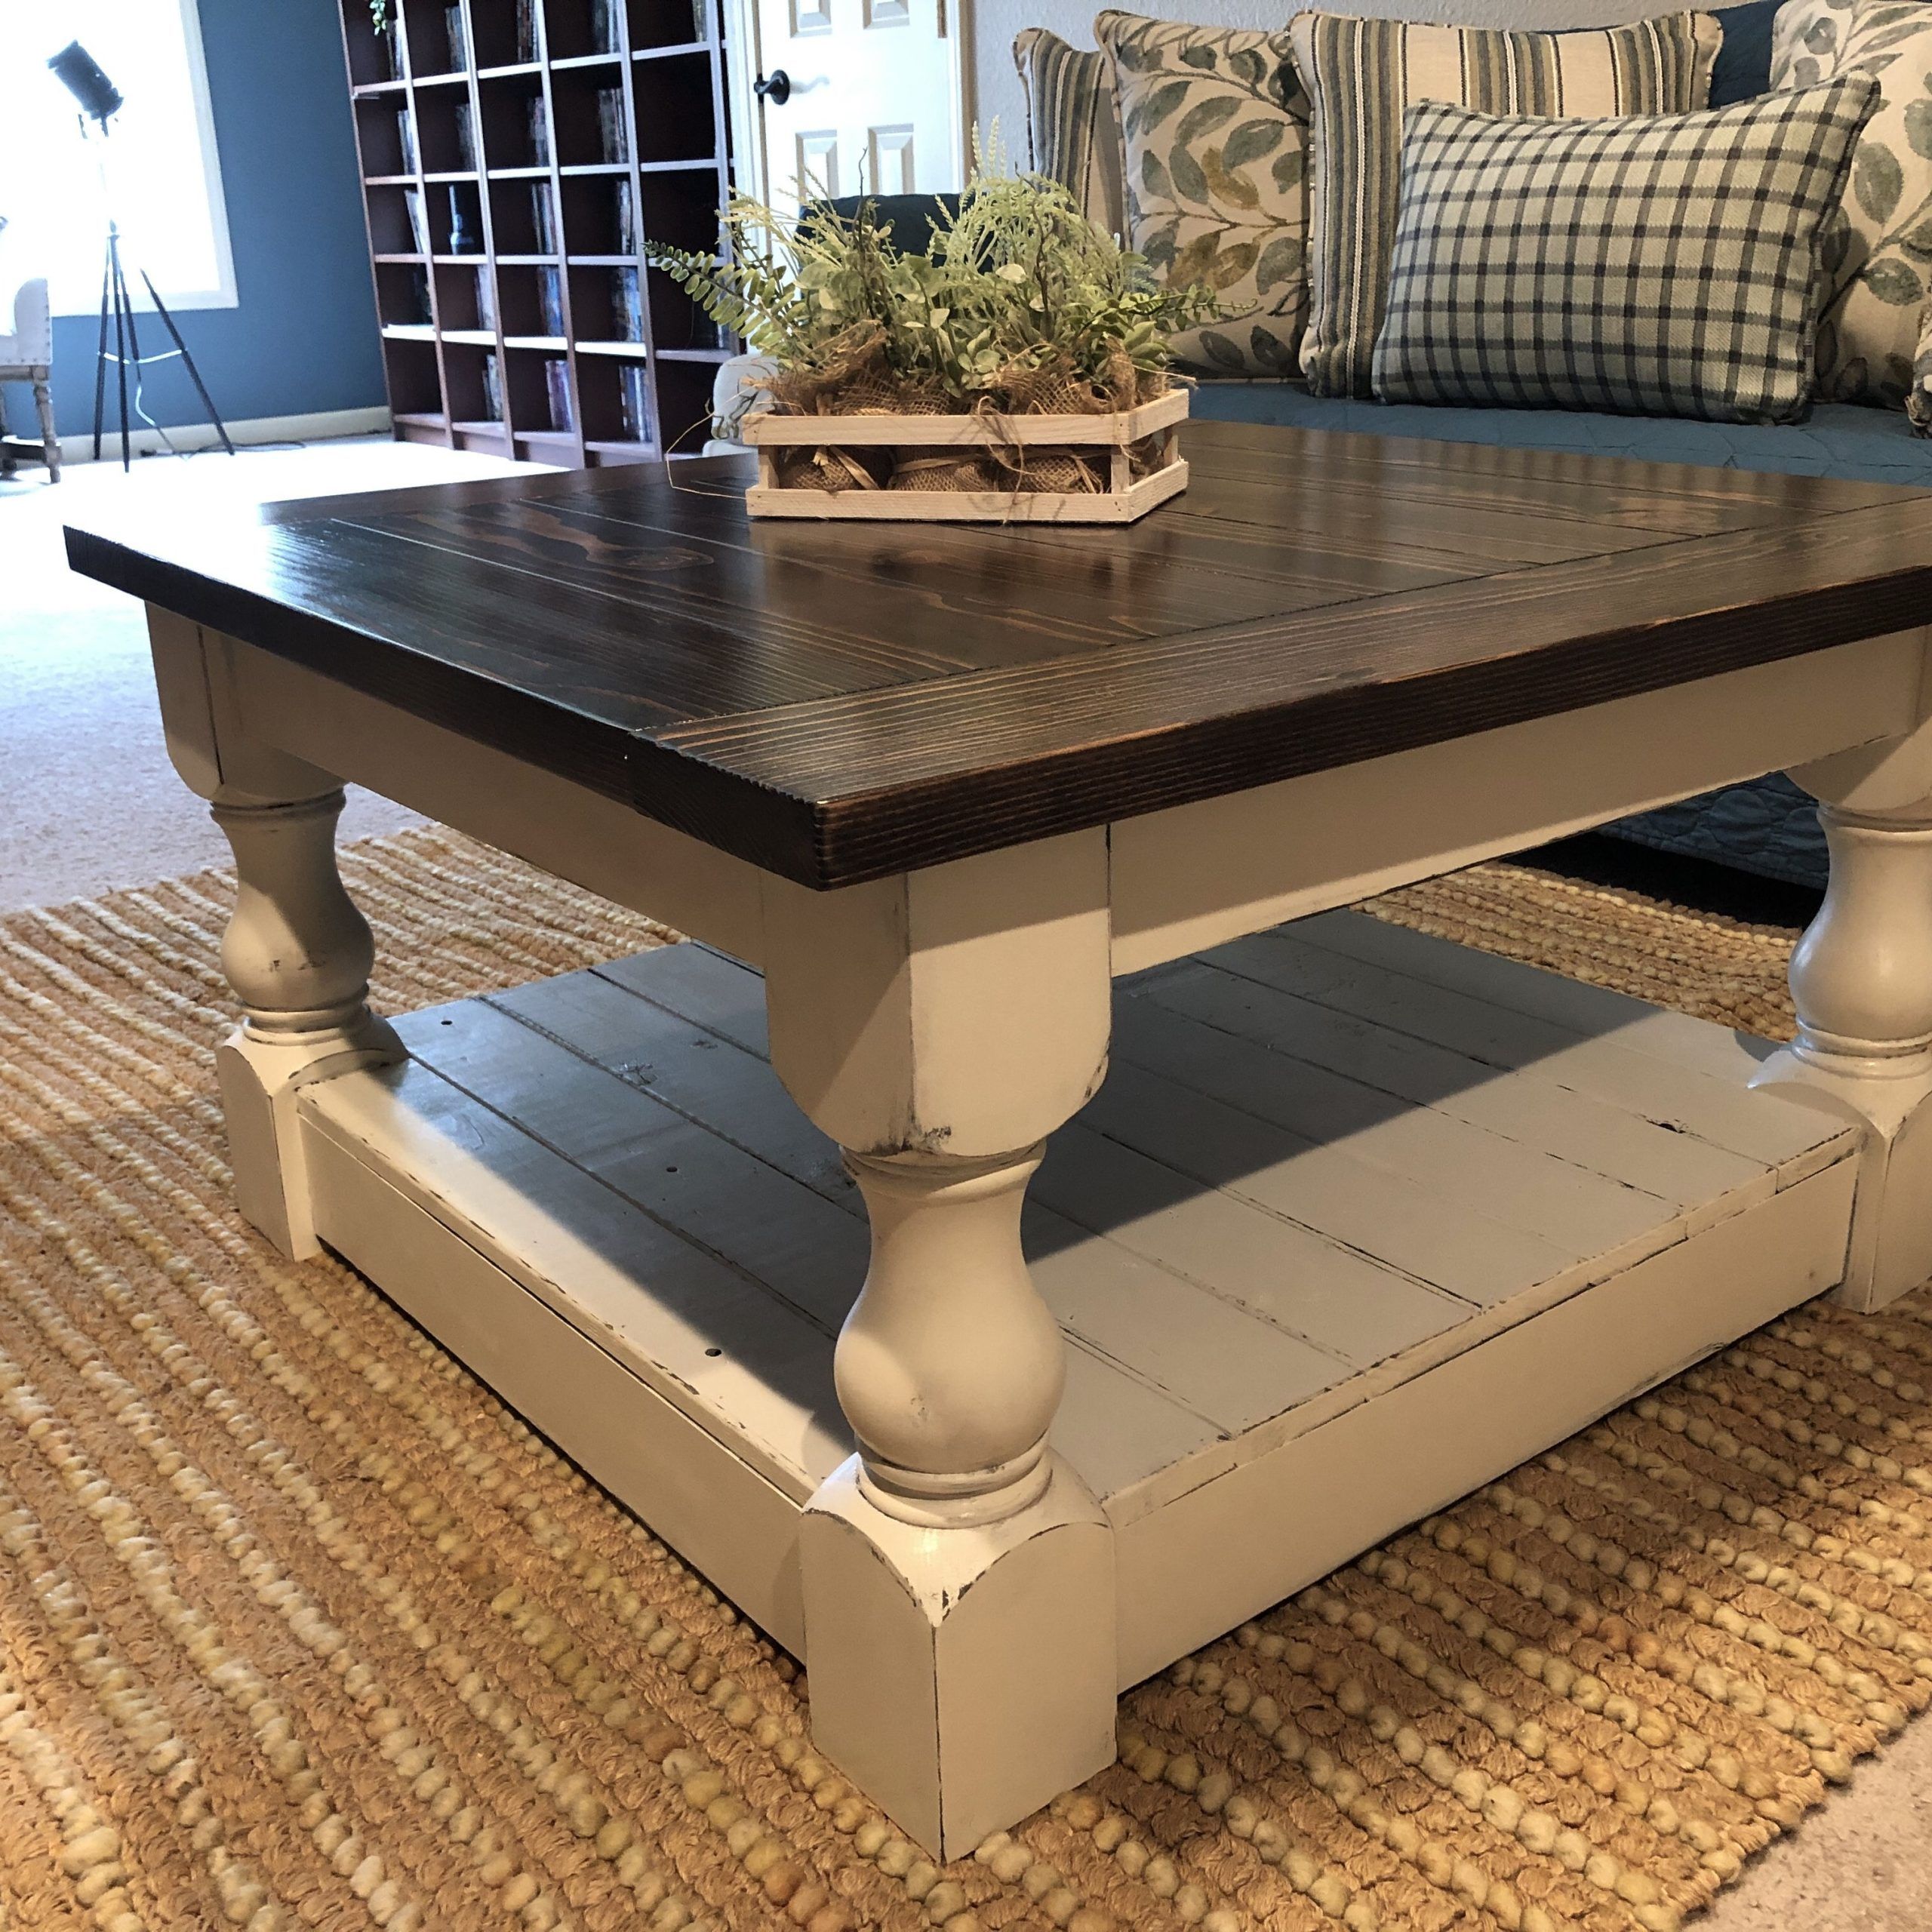 Rustic Square Coffee Tables: An Ideal Choice For Any Room – Coffee Throughout Transitional Square Coffee Tables (Gallery 16 of 20)